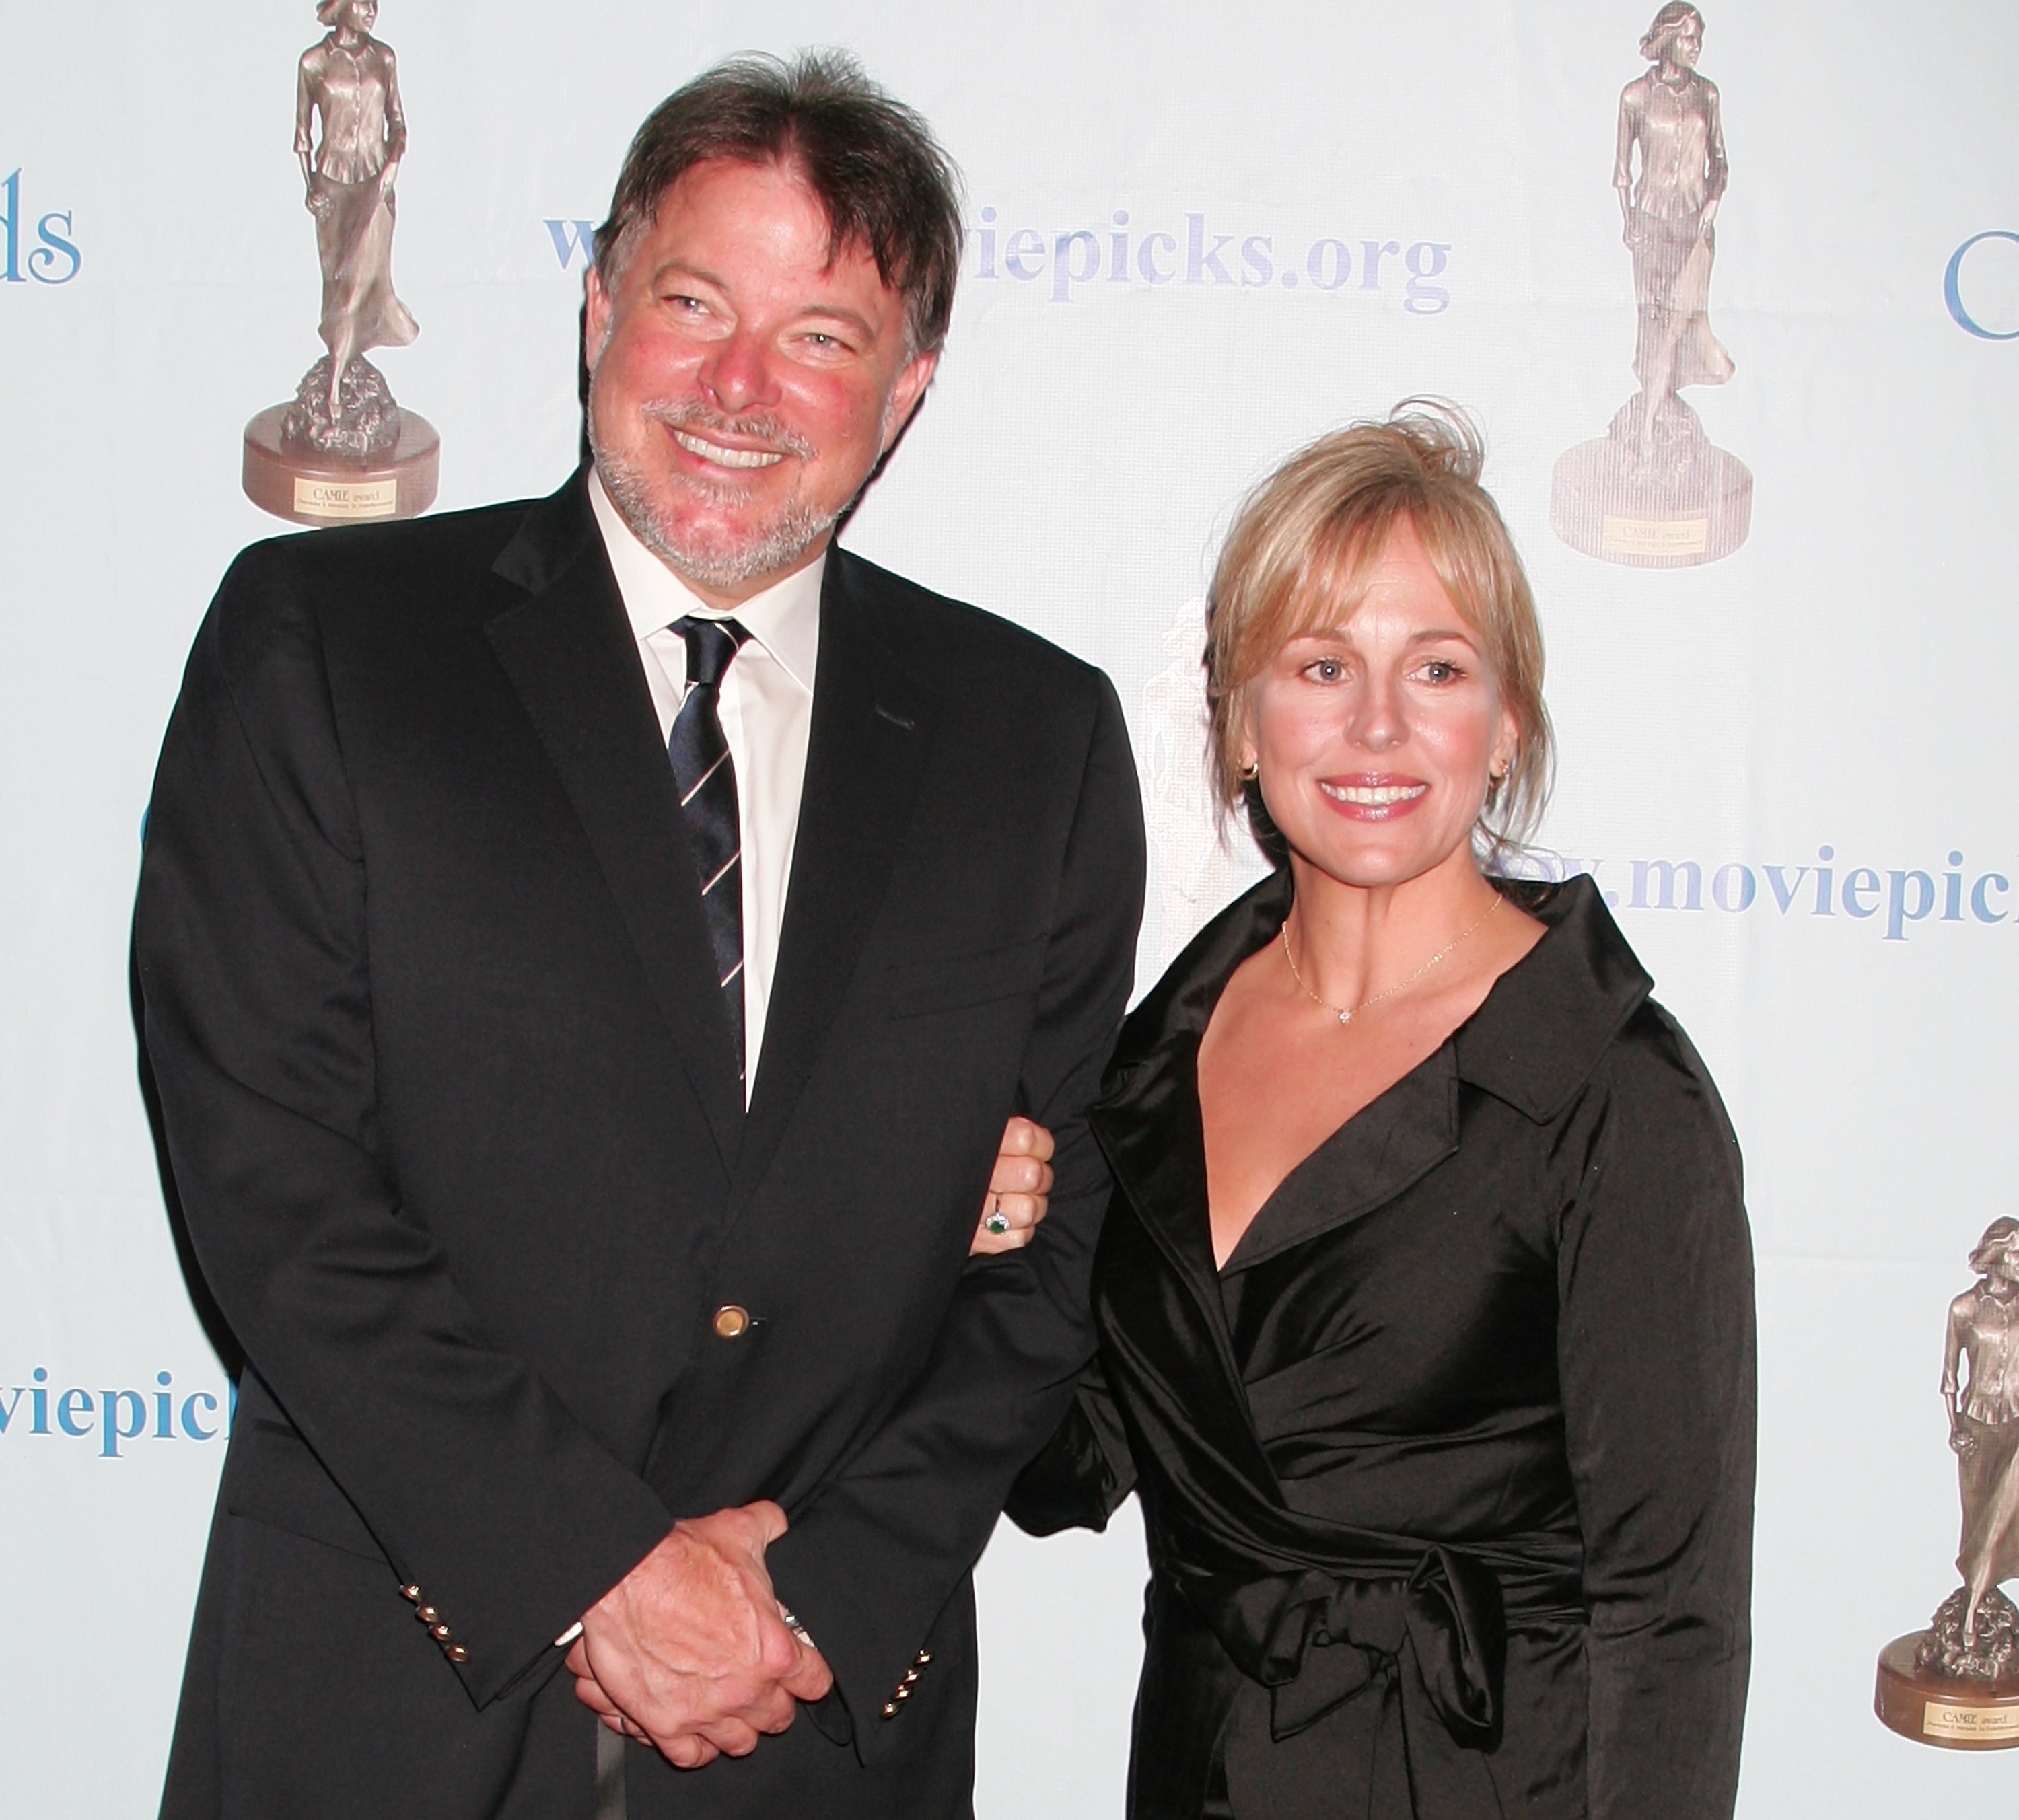 Jonathan Frakes and Genie Francis at the Camie Awards on May 3, 2008, in Beverly Hills, California. | Source: Getty Images